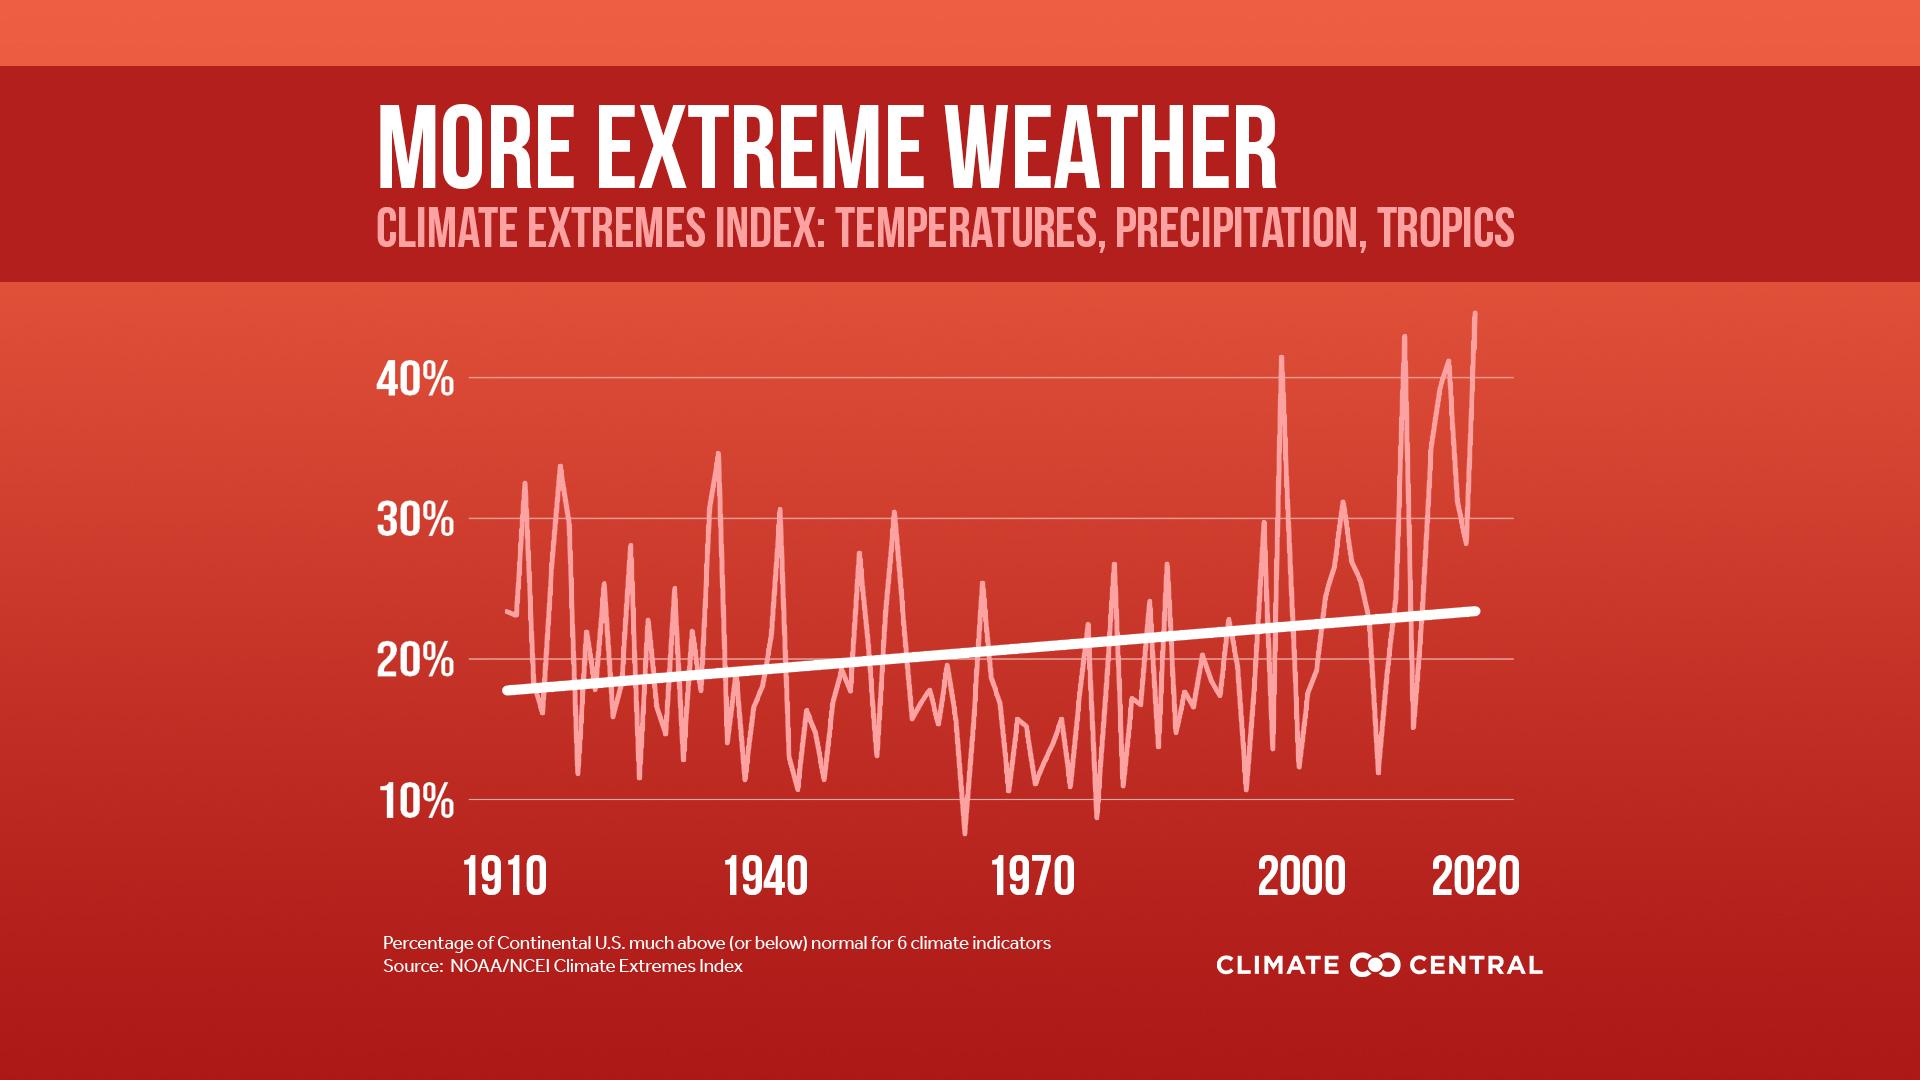 Climate Extremes Index, 1910-2020 - Climate Extremes